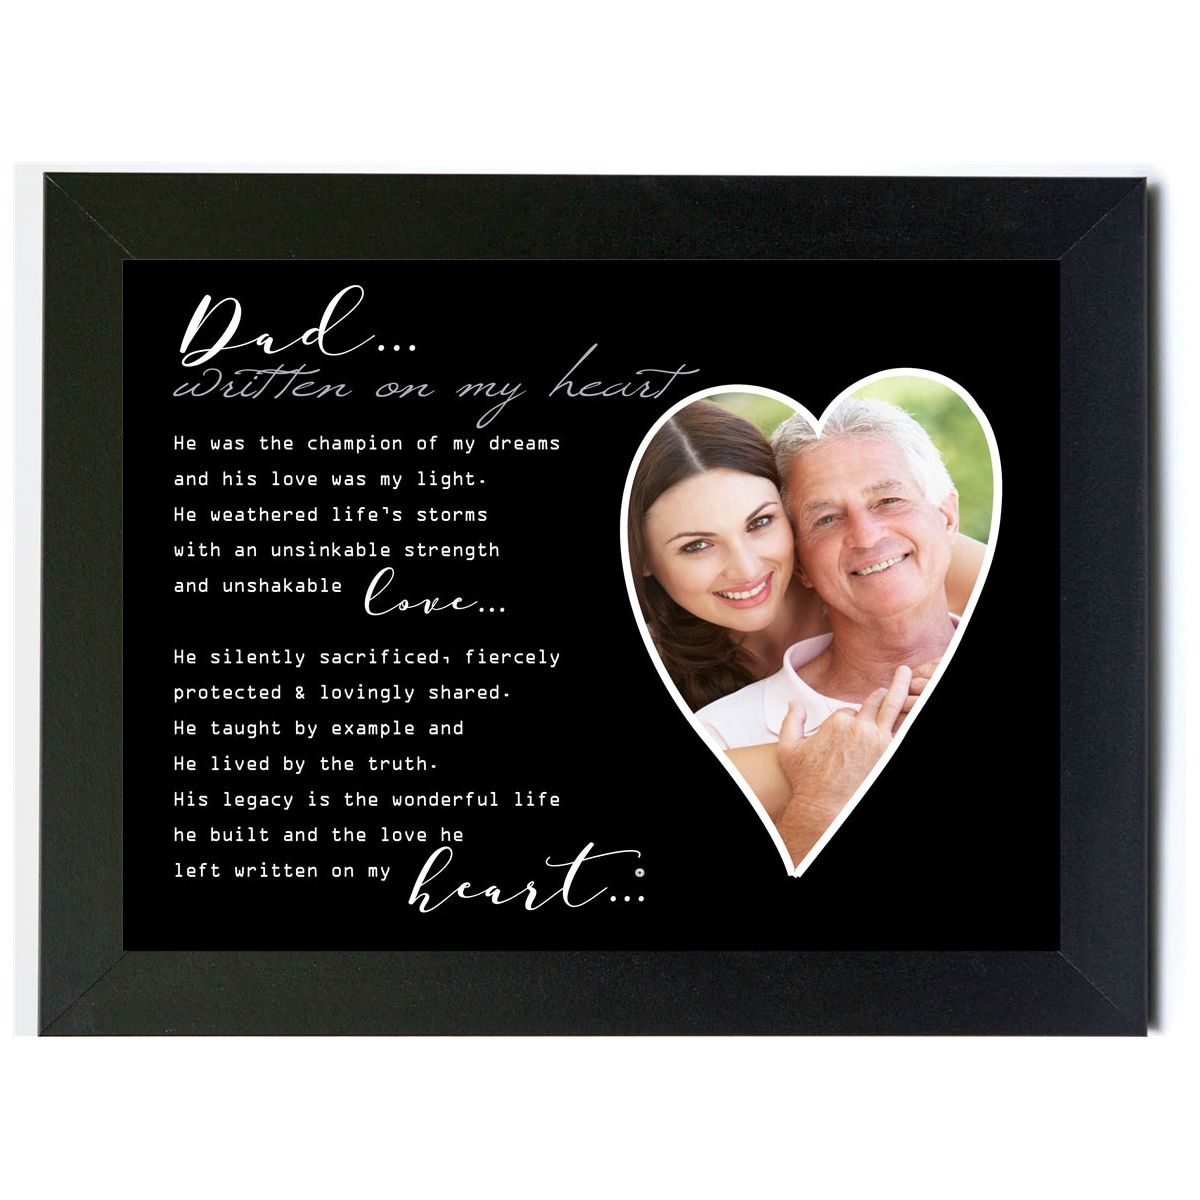 8x10 black frame with &quot; Dad... Written on My Heart&quot; poem and an heart shaped opening for a photograph.